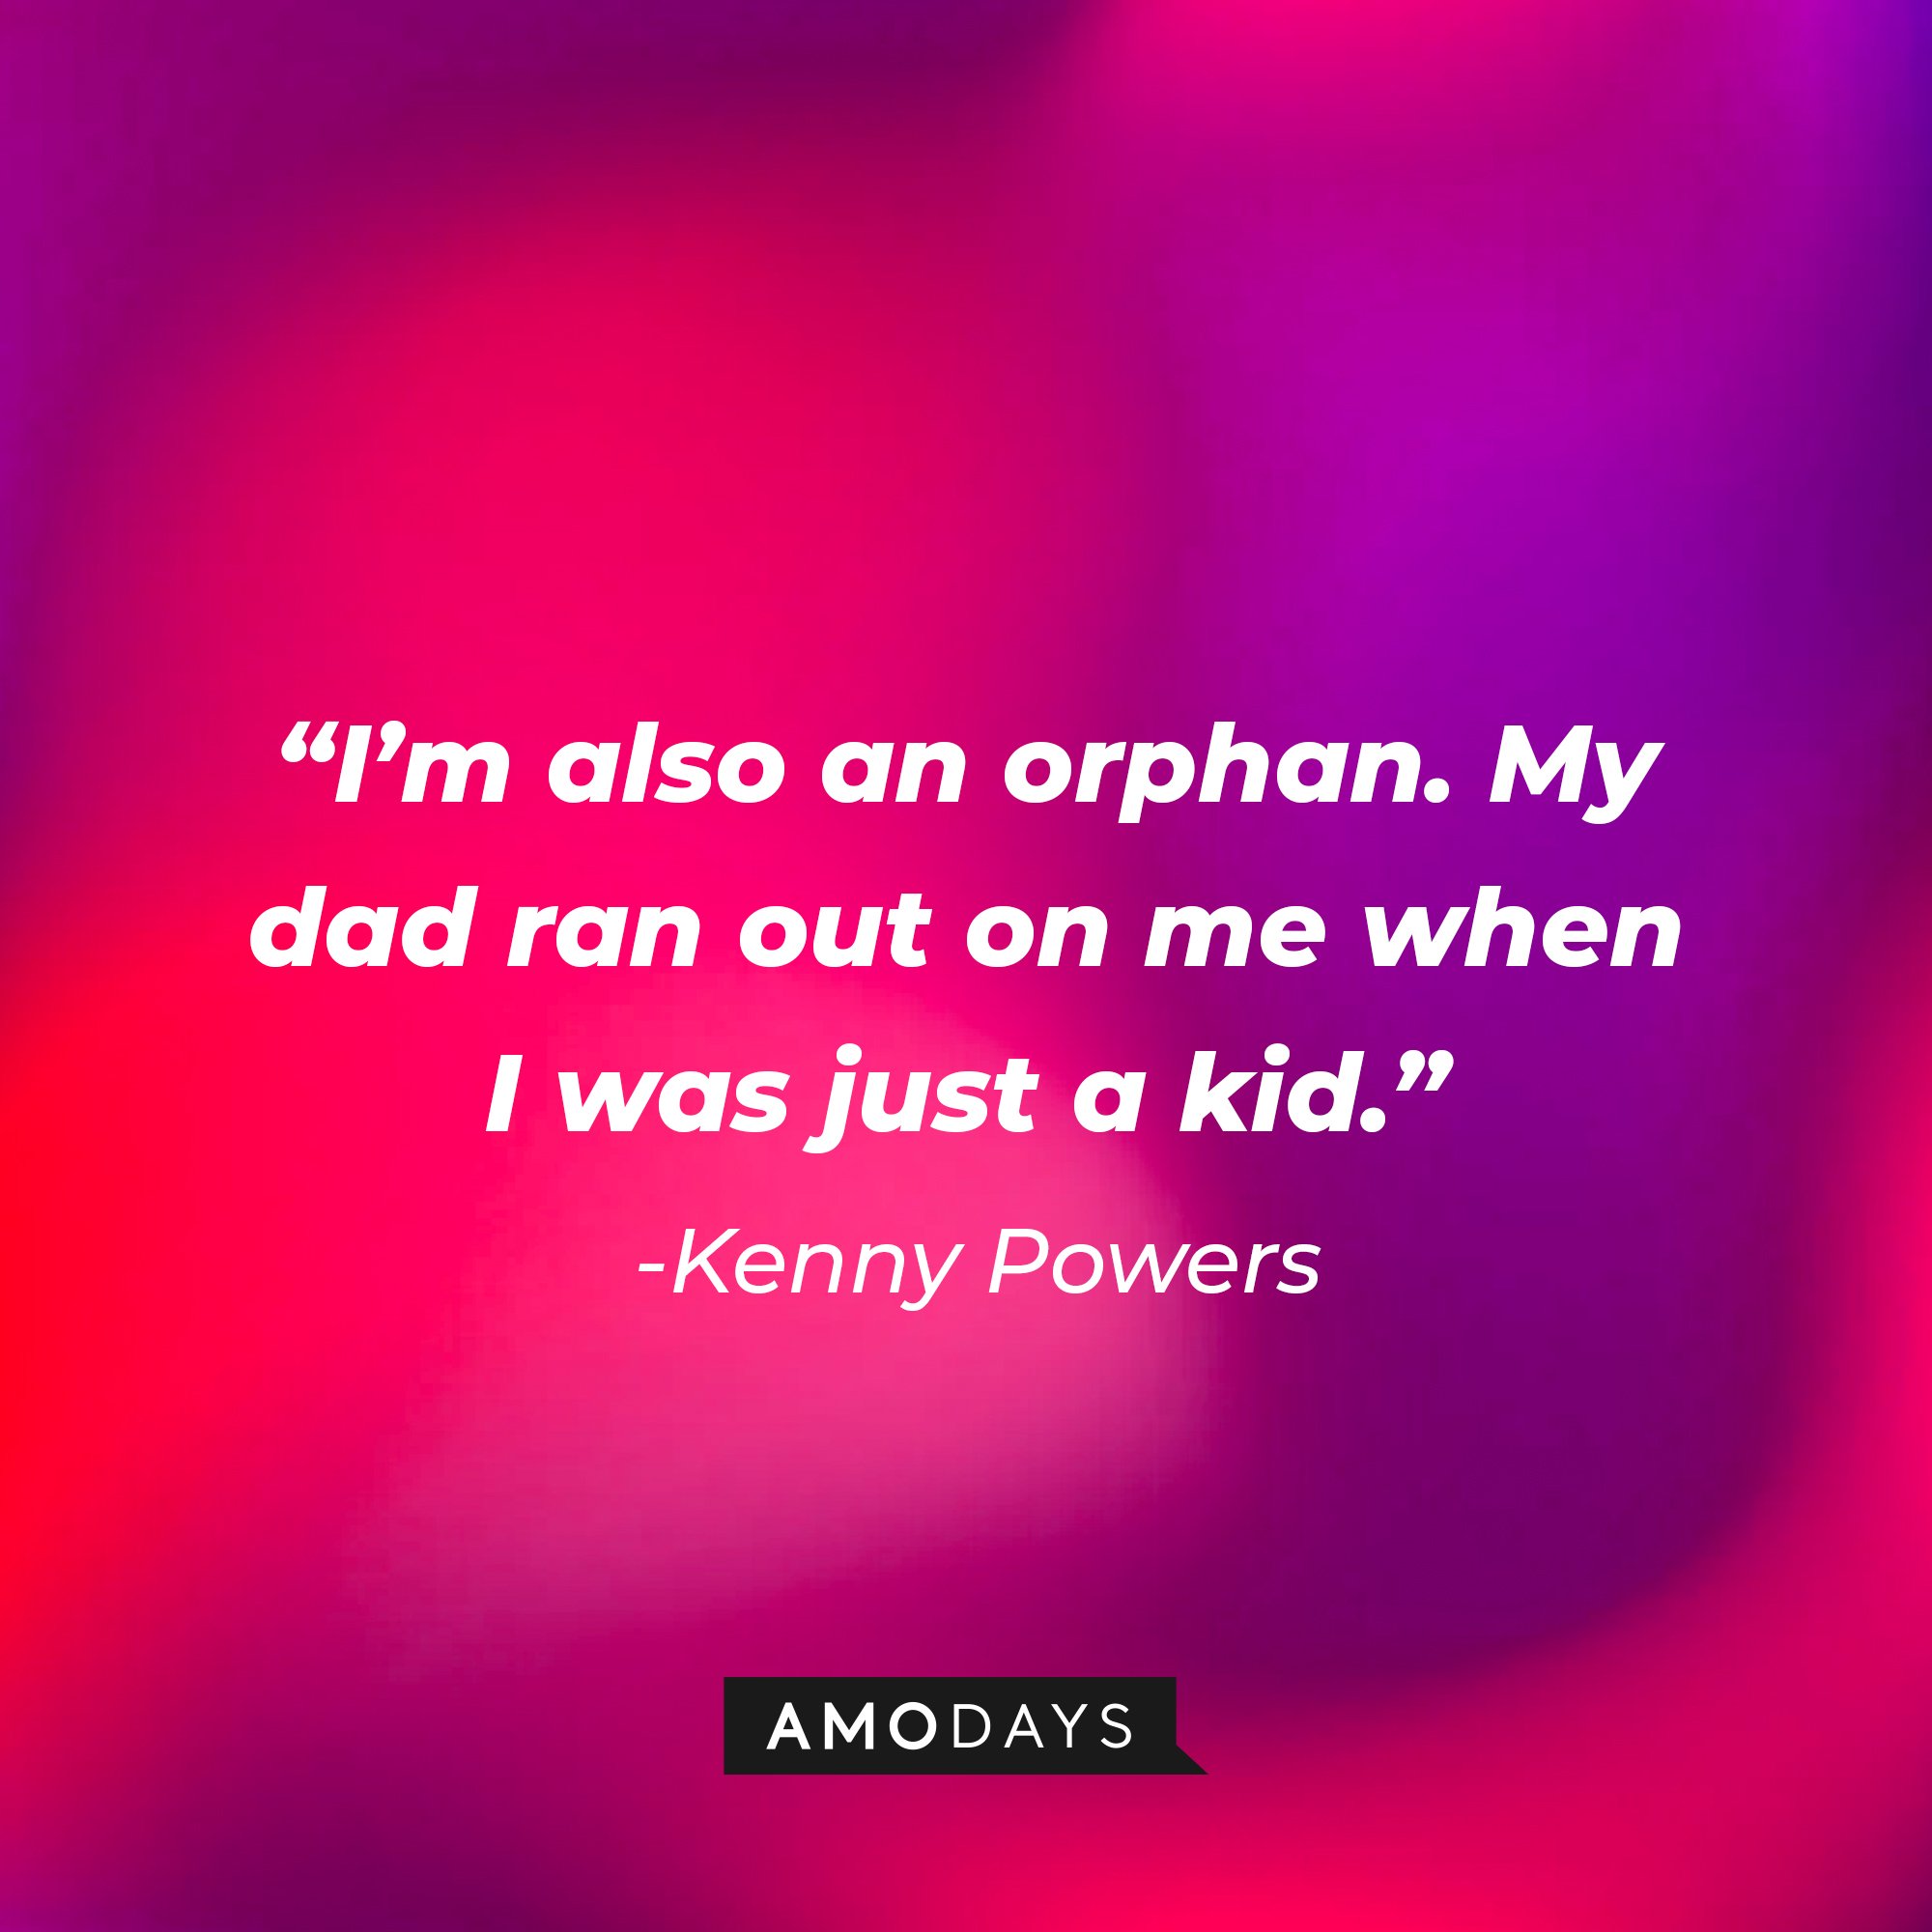 Kenny Powers' quote: “I'm also an orphan. My dad ran out on me when I was just a kid.” | Image: AmoDays